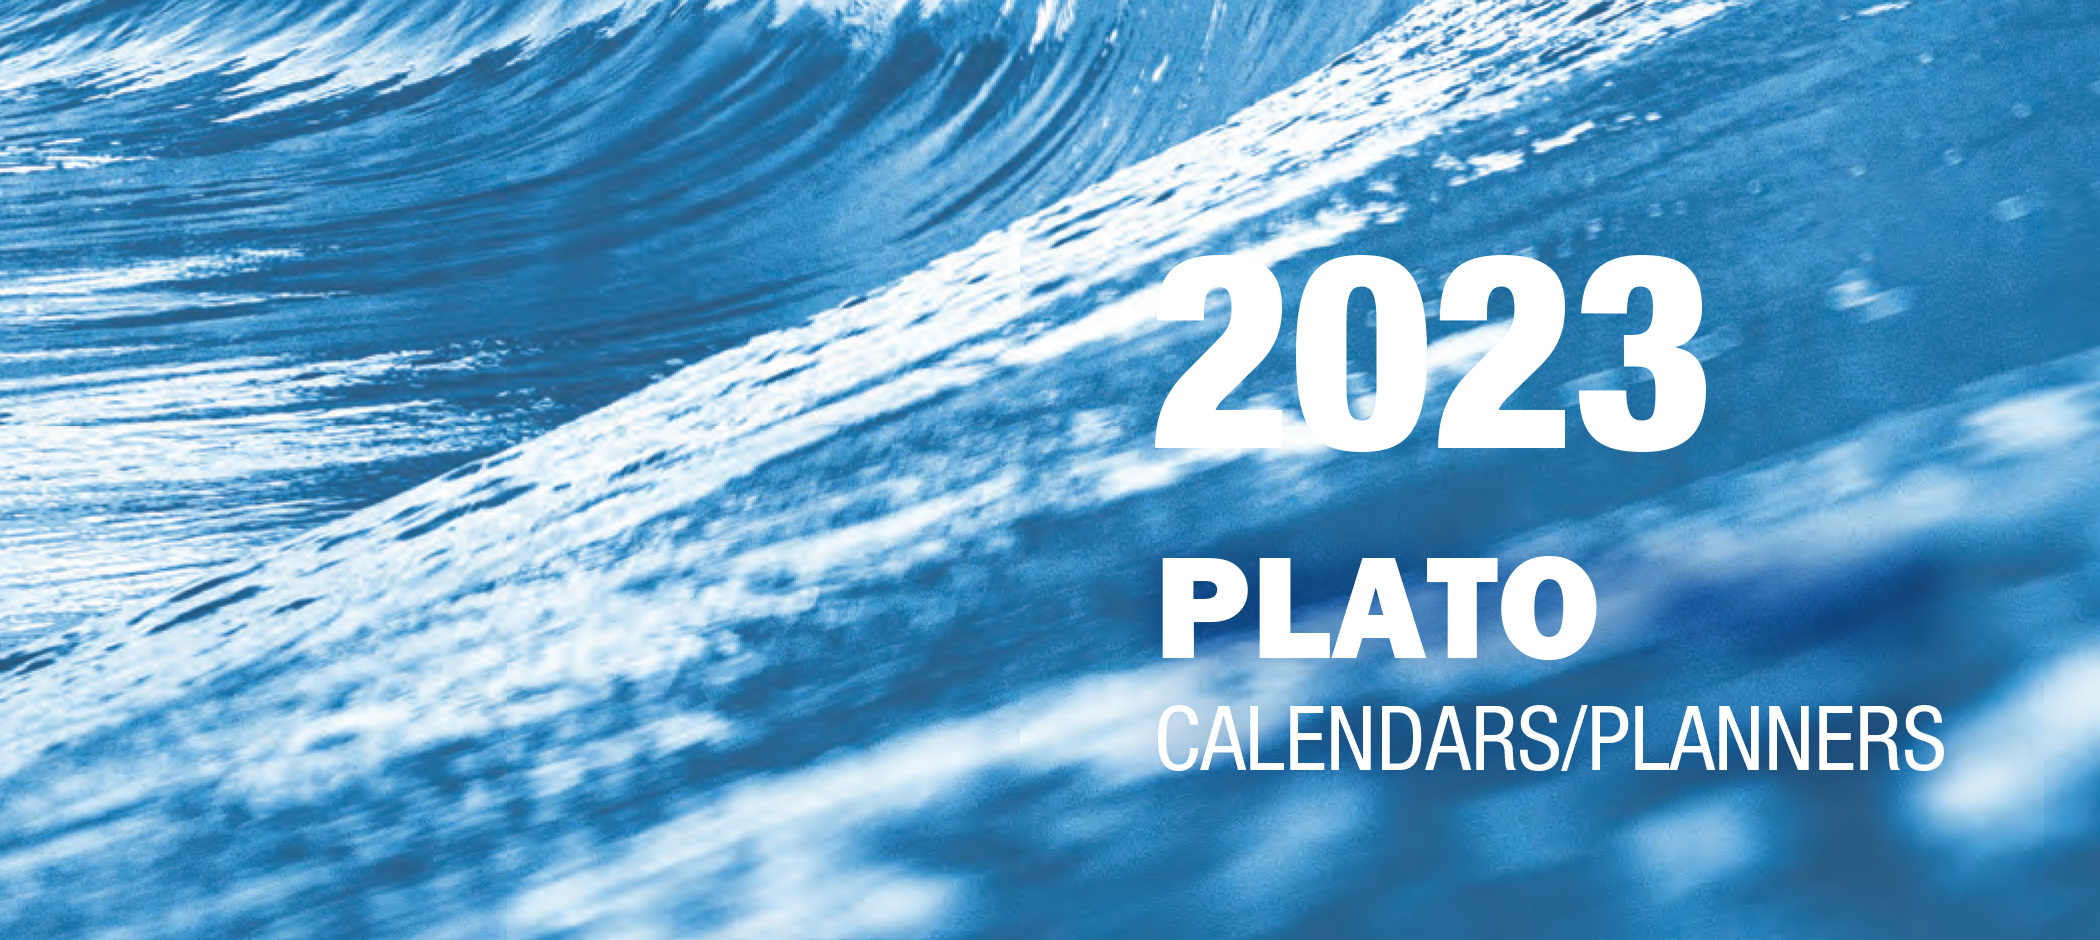 2023 Plato Calendars and Planners